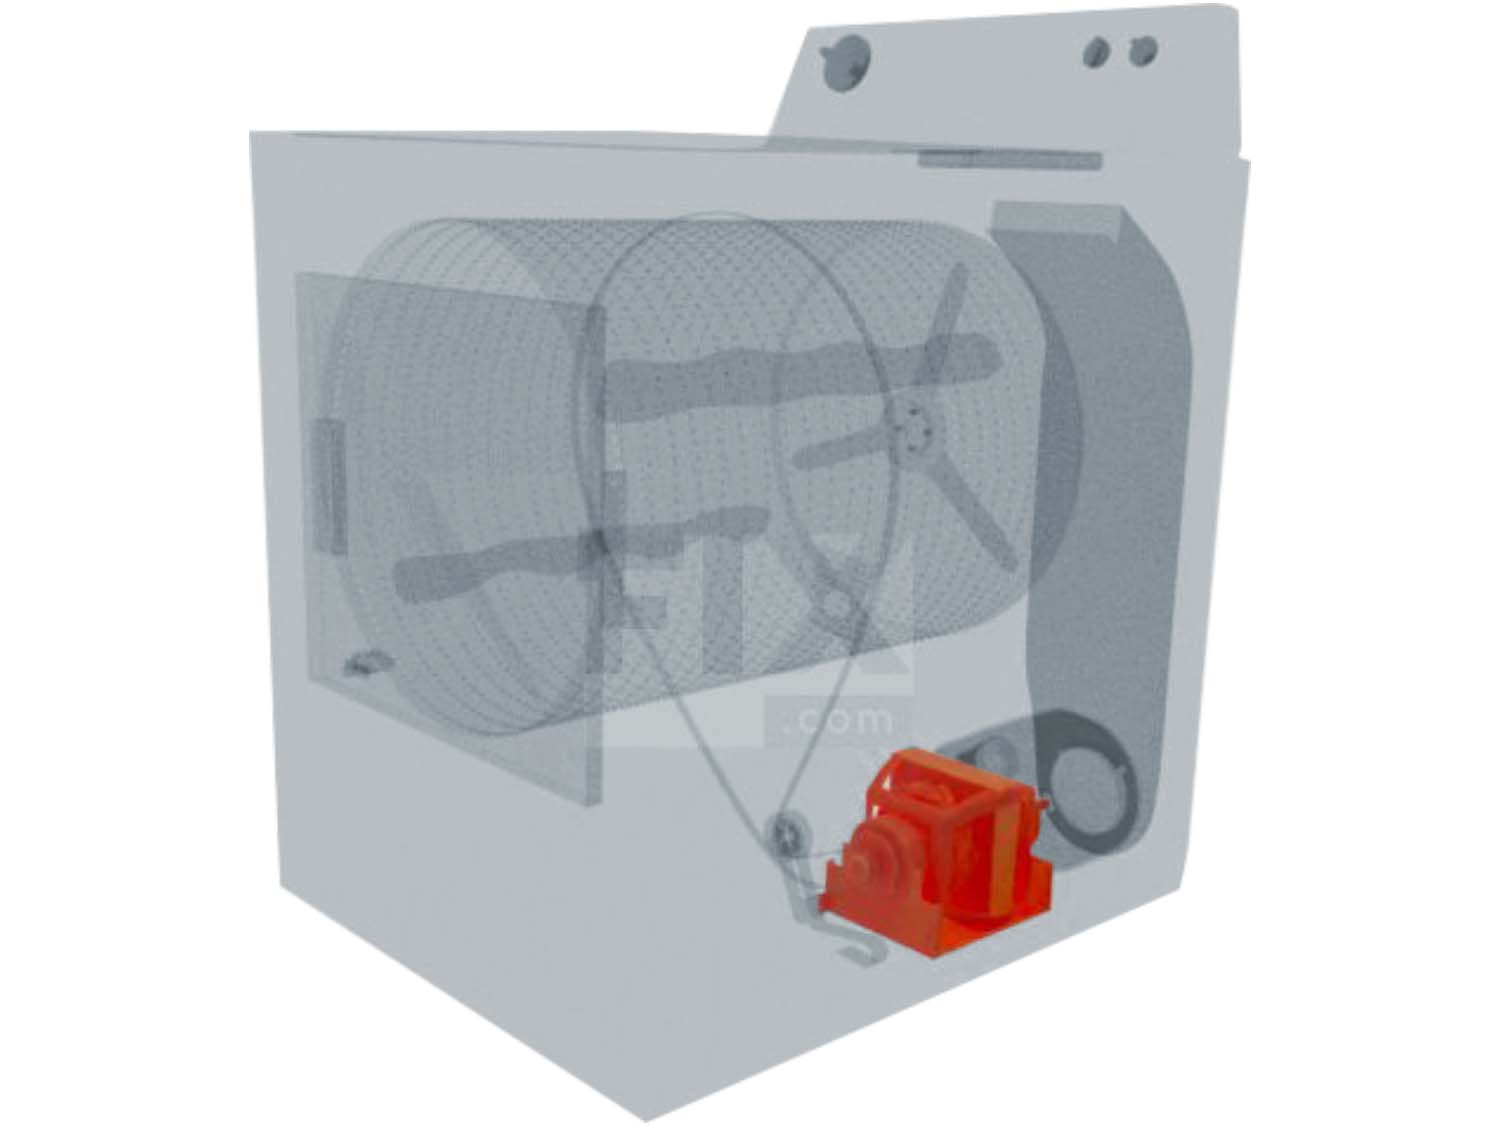 A 3D diagram showing the components of a dryer and specifying the location of the motor